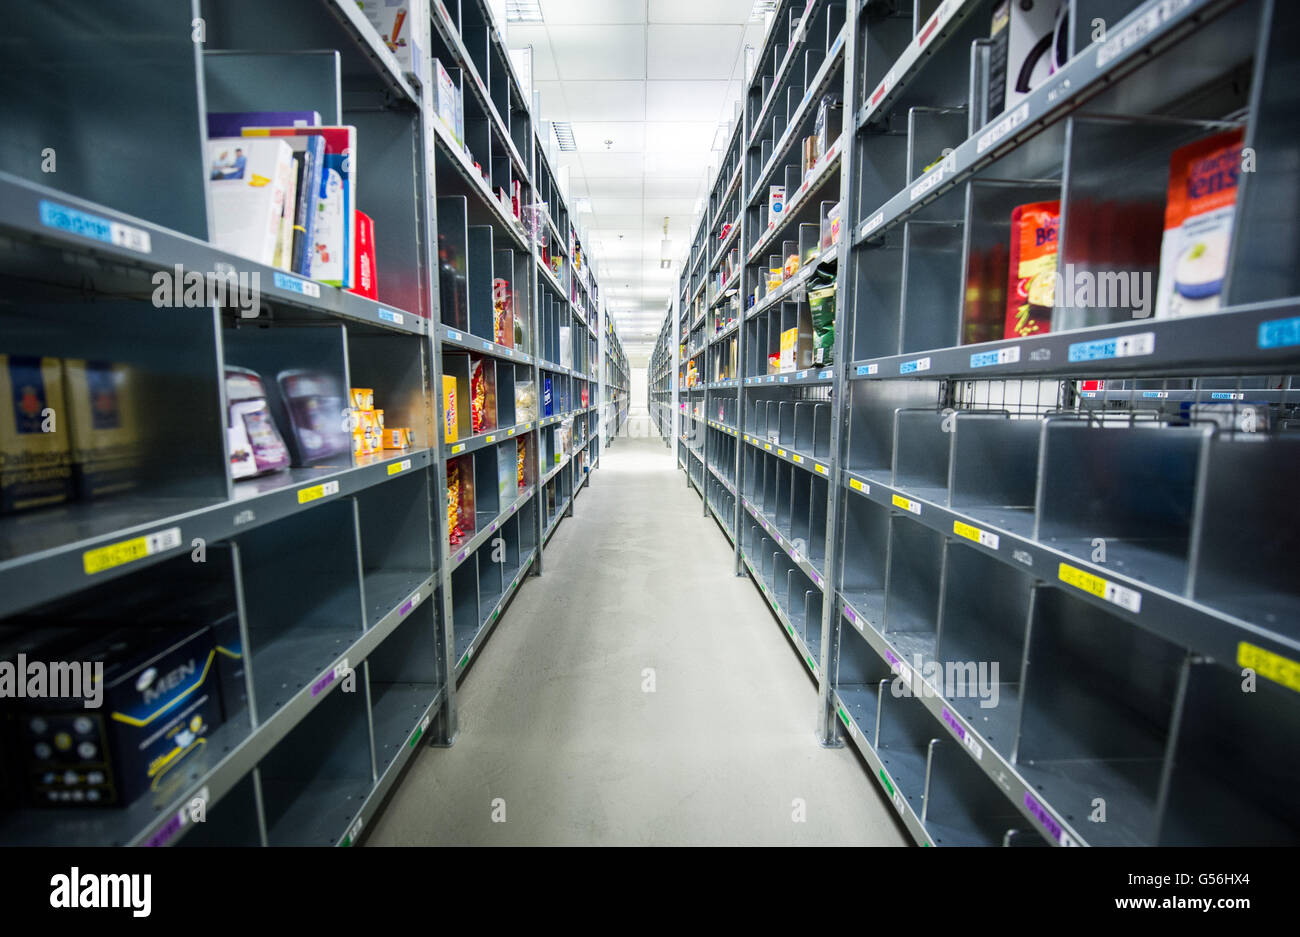 An Amazon Prime Now shelves in the warehouse in Berlin, Germany, 12 May  2016. Photo: Sophia Kembowski/dpa Stock Photo - Alamy